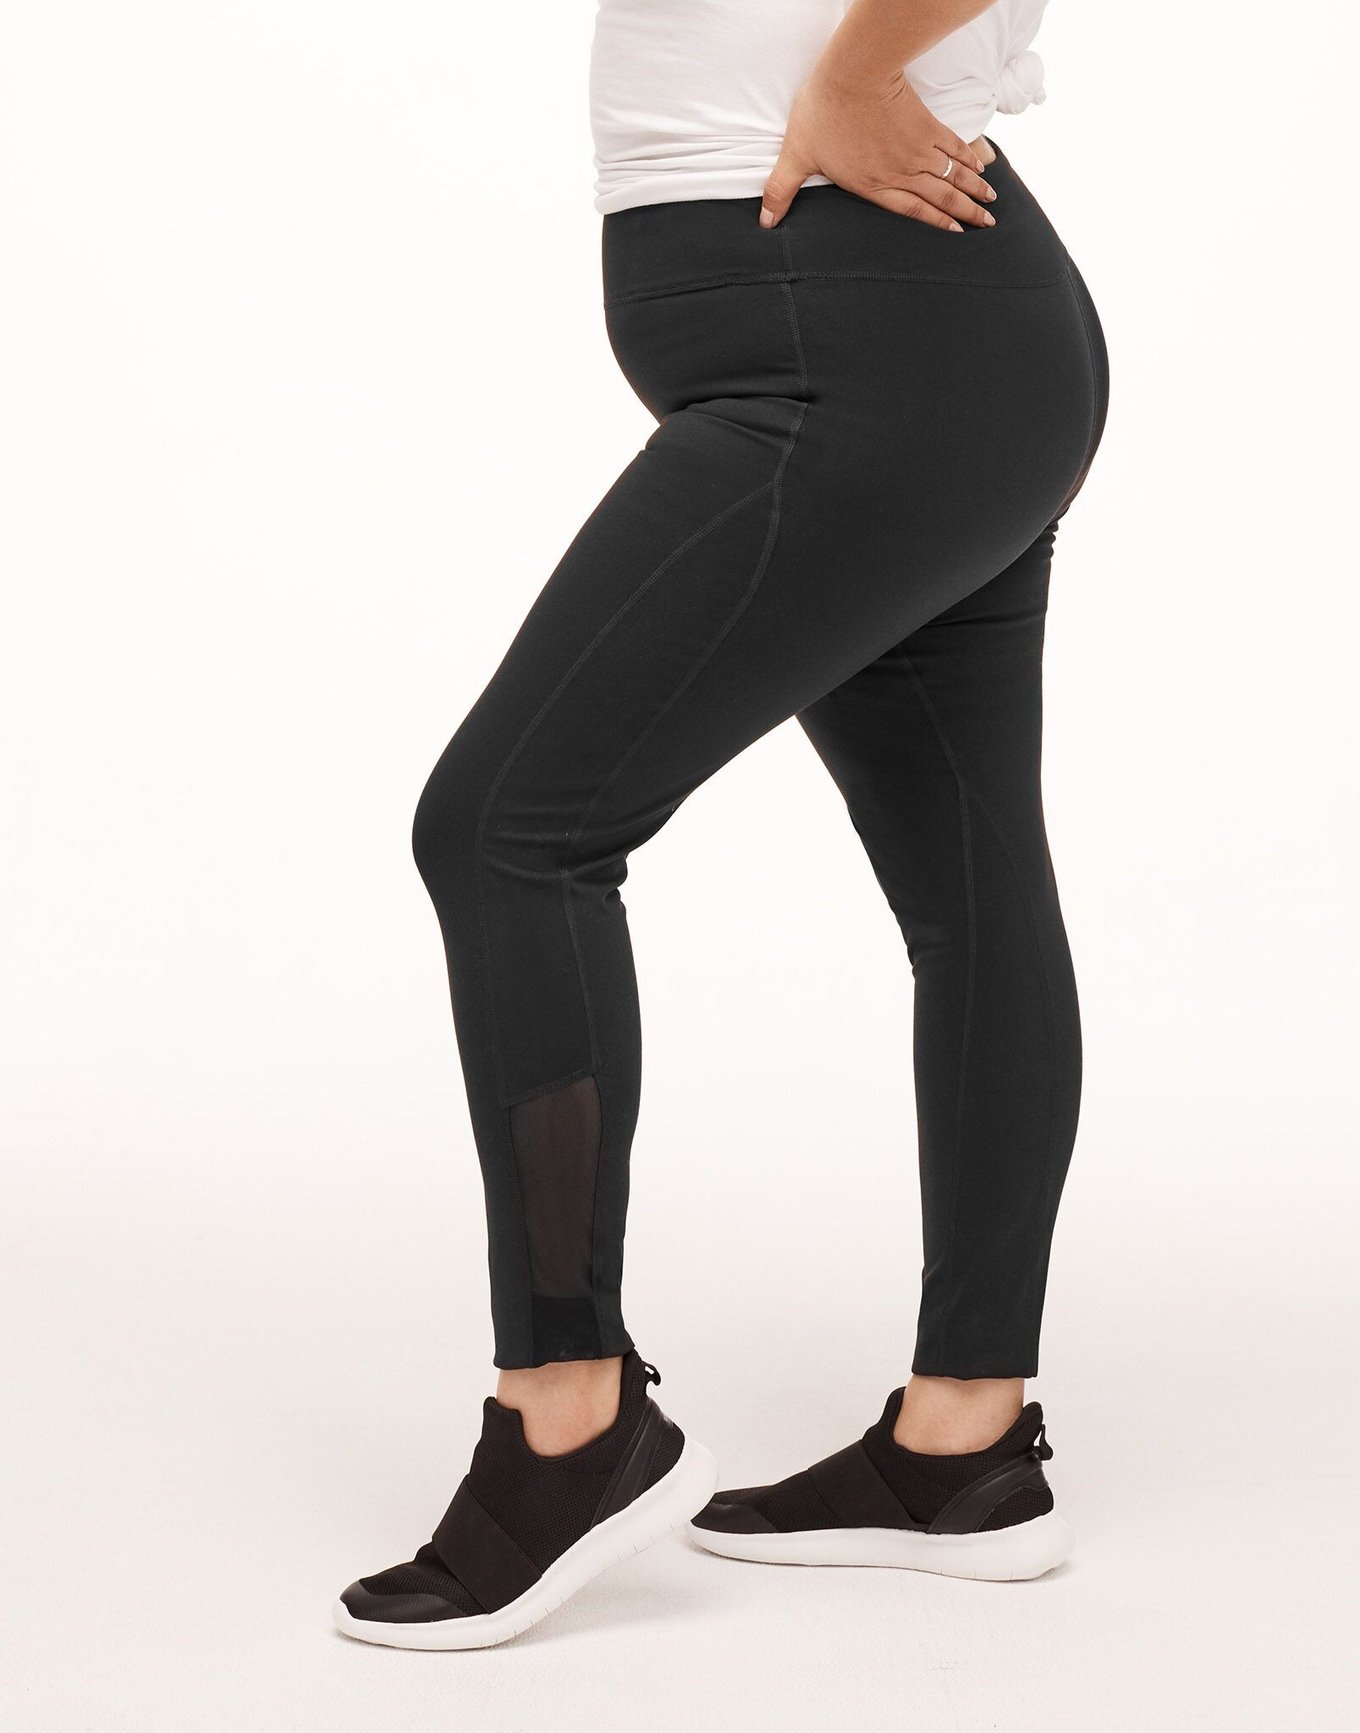 Activewear High Waisted Yoga Pants with Side Pockets and Mesh